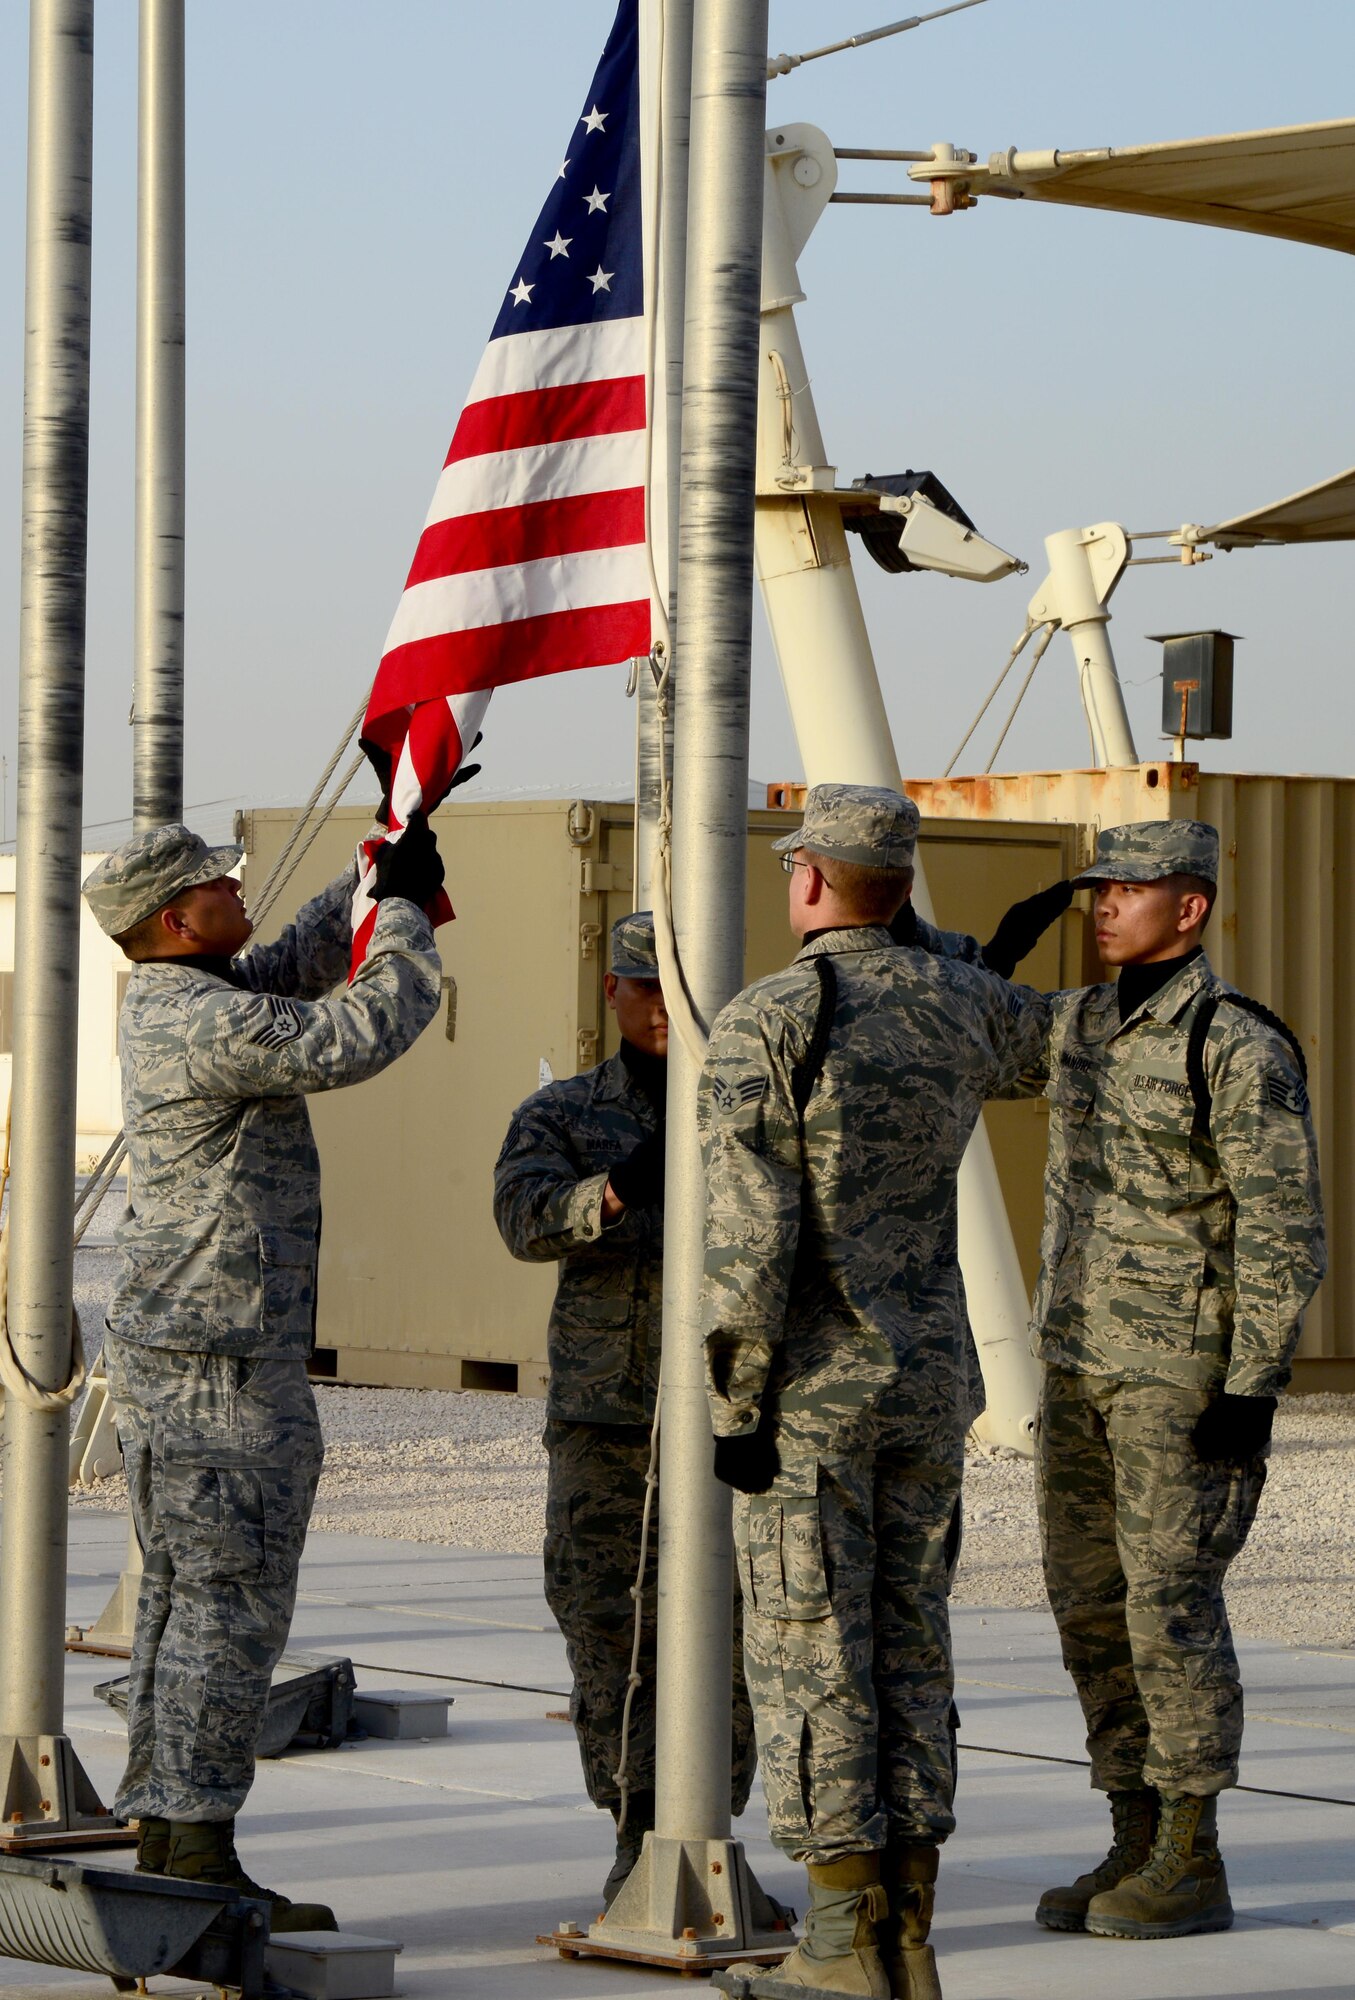 U.S. Air Force Airmen from the 379th Air Expeditionary Wing Honor Guard lower the American flag during a Washington’s Birthday retreat ceremony, Feb. 16, 2015, at Al Udeid Air Base, Qatar. Washington’s Birthday, also known as President’s day, was originally celebrated on February 22 but moved to the third Monday of February in an effort to celebrate a more generalized recognition of Presidential achievements. (U.S. Air Force photo by Senior Airman Kia Atkins)